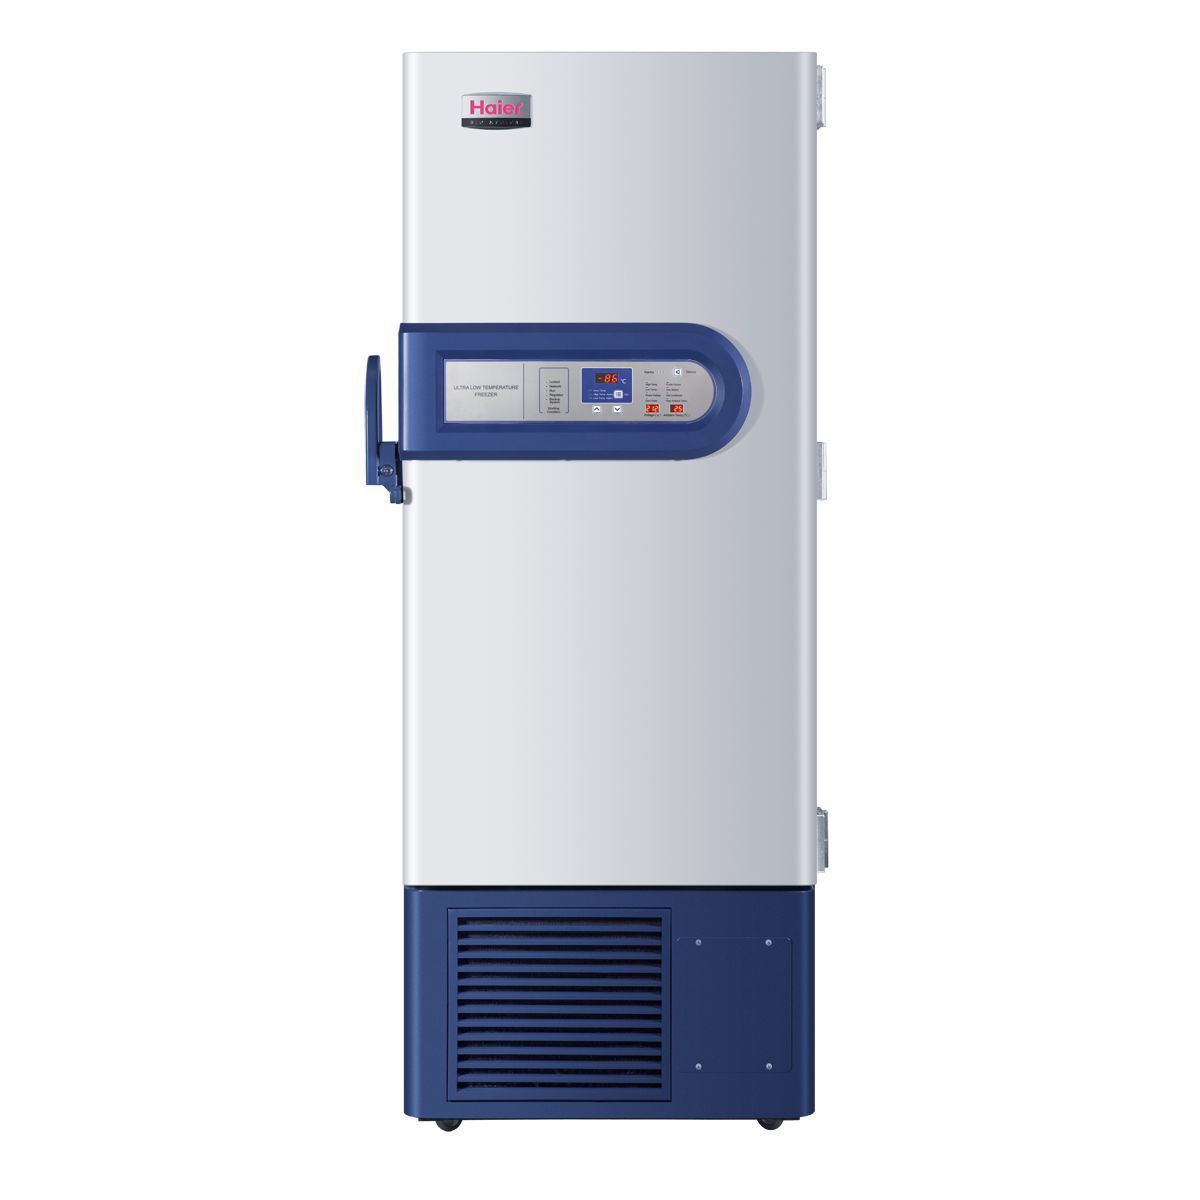 Laboratory freezer / cabinet / ultralow-temperature / 1-door -86 °C, 338 L | DW-86L338 Haier Medical and Laboratory Products